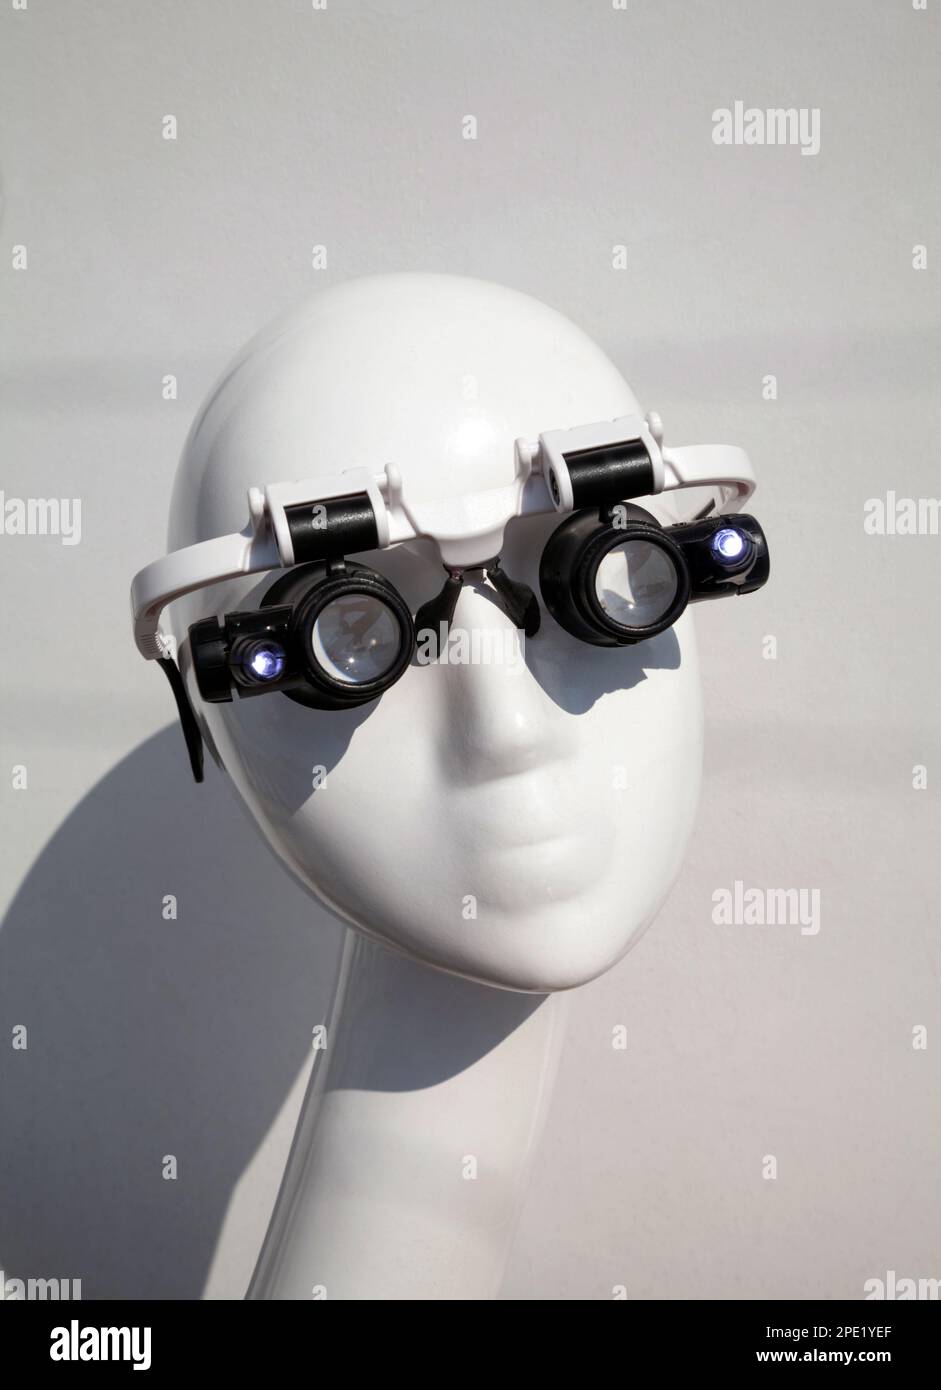 Glasses With Magnifying Lens Head With 23x Zoom & LED Lighting